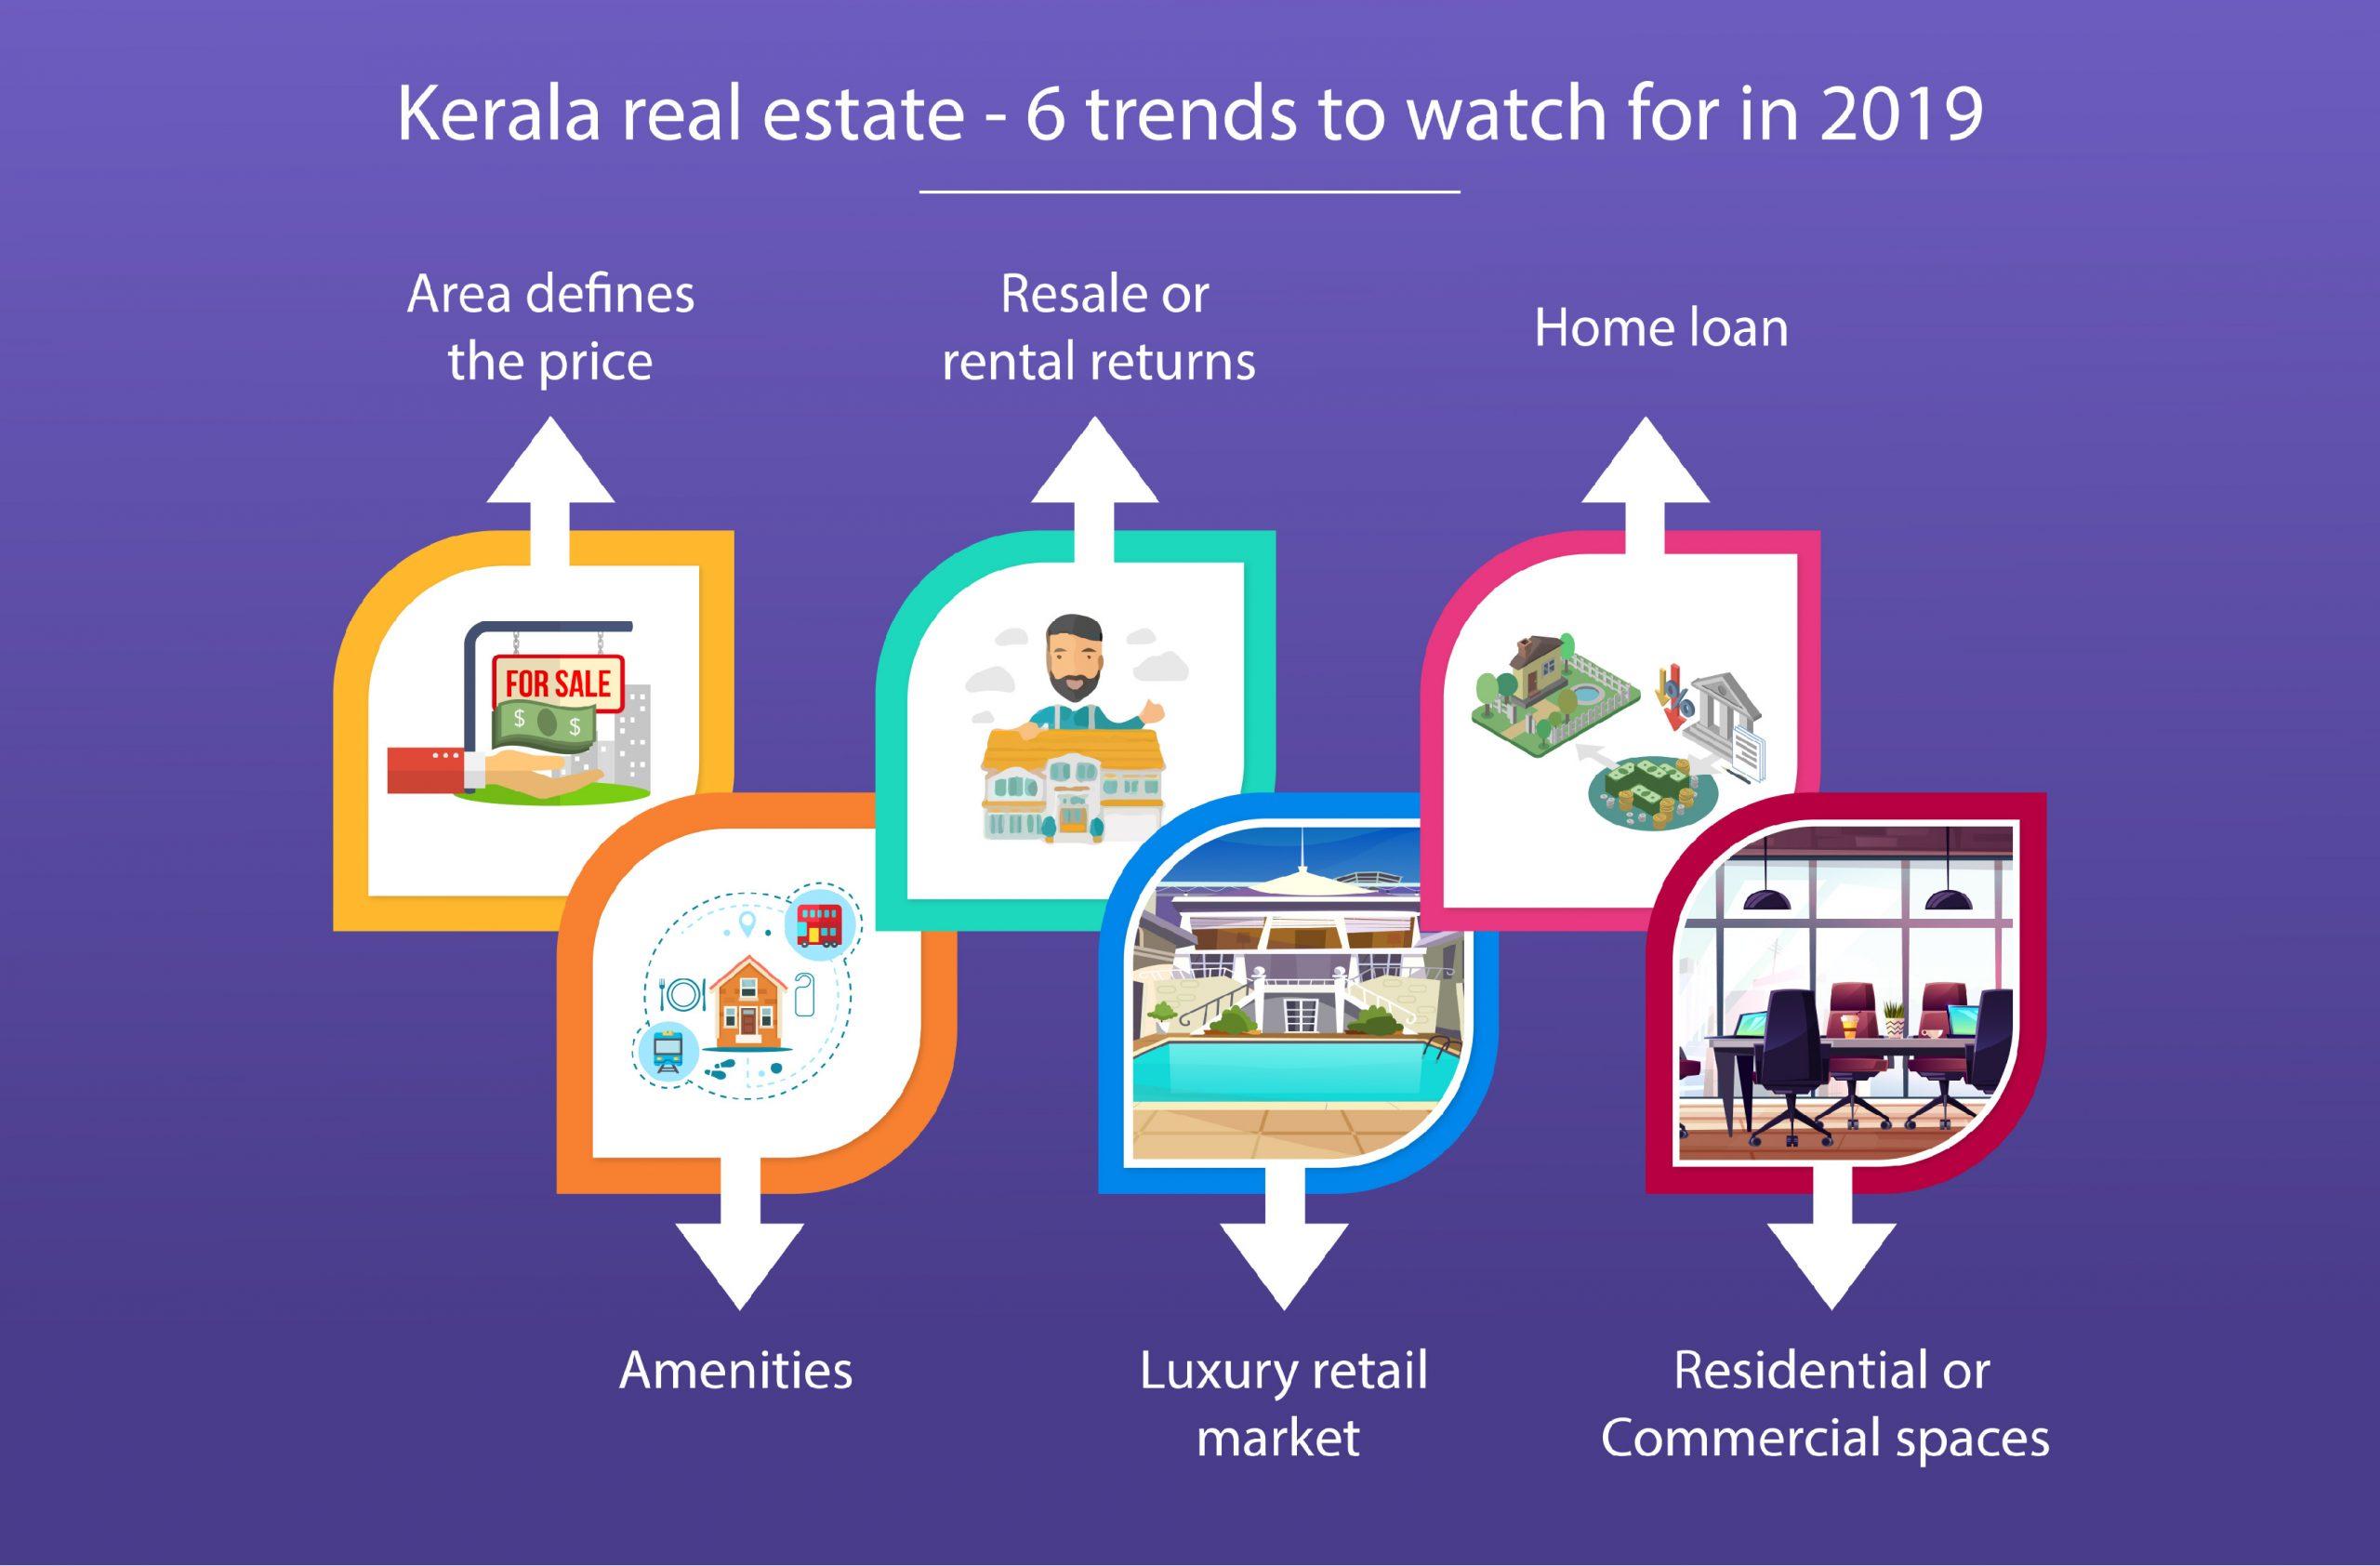 Kerala real estate – 6 trends to watch for in 2019